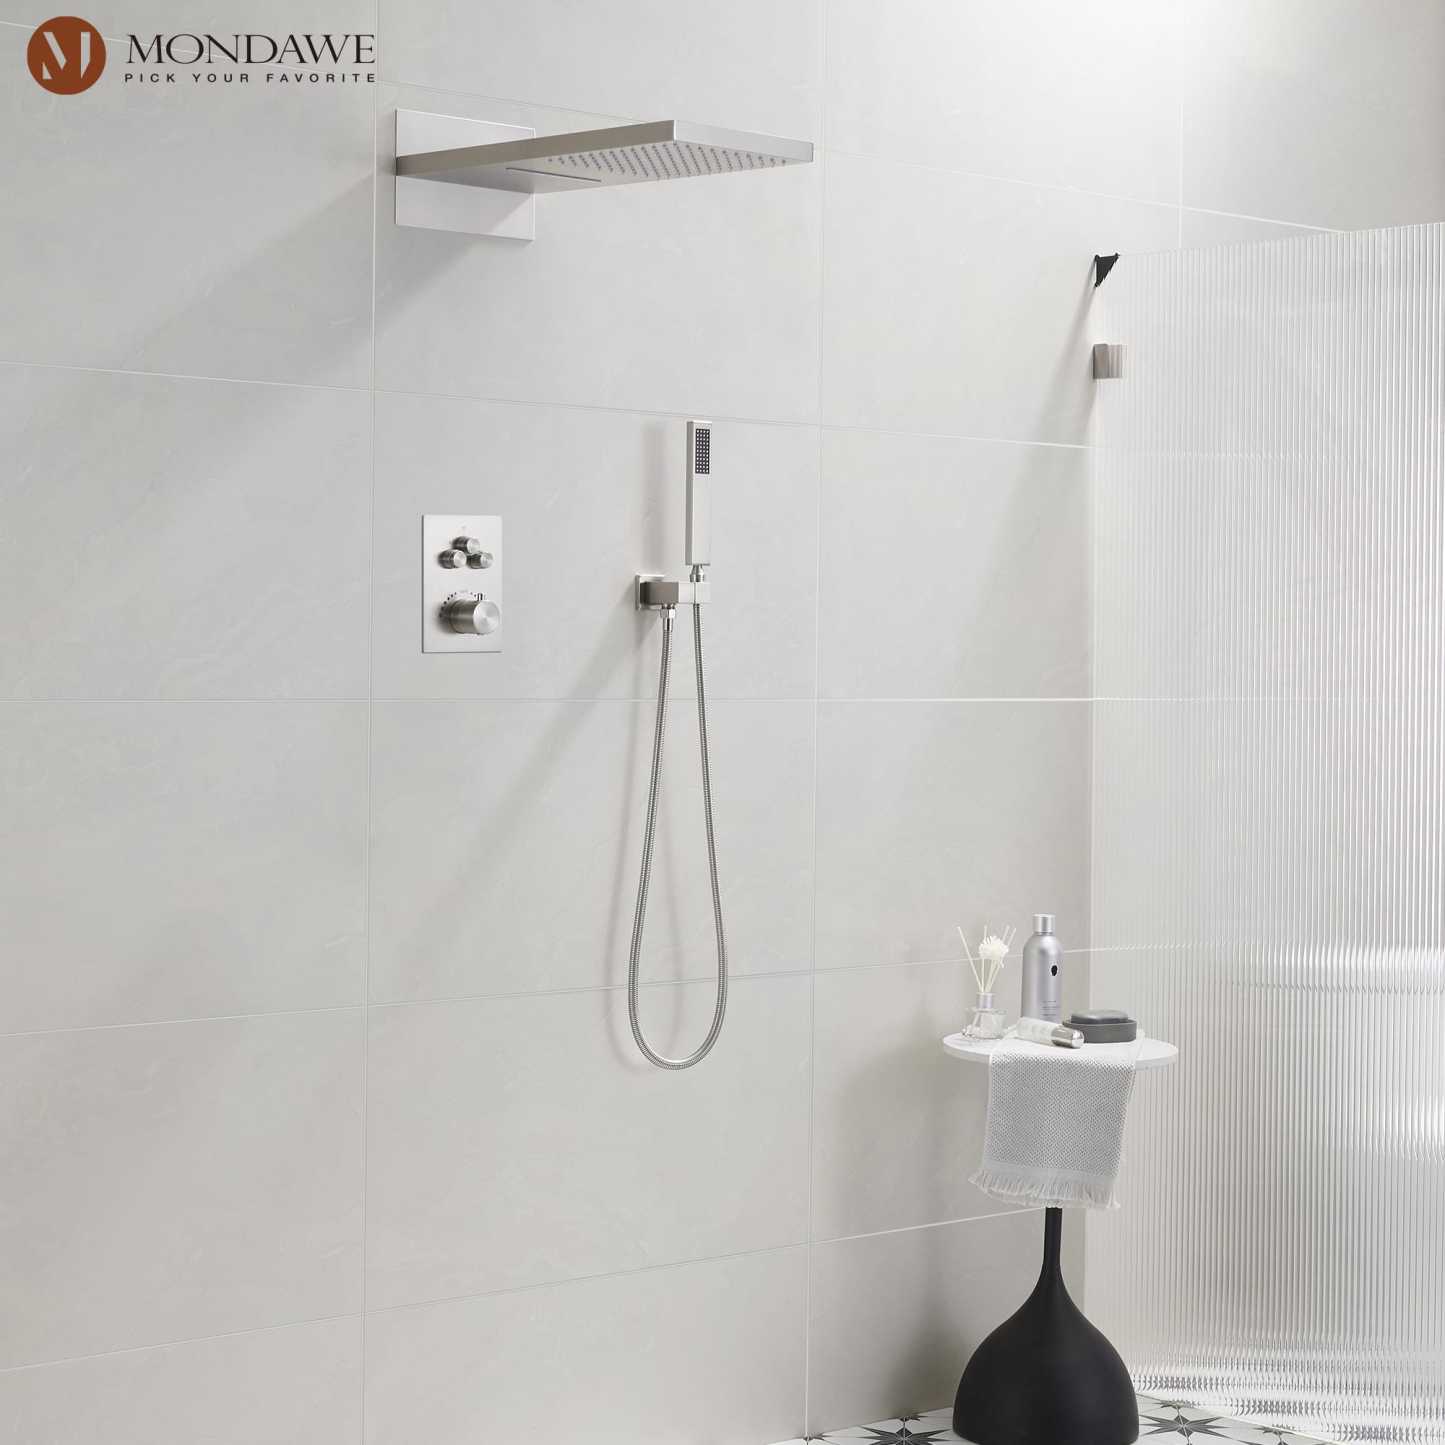 Mondawe 2 Functions Wall Mount Luxury Thermostatic Complete Shower System (Rough-In Valve Included) in Nickel/Black-Mondawe